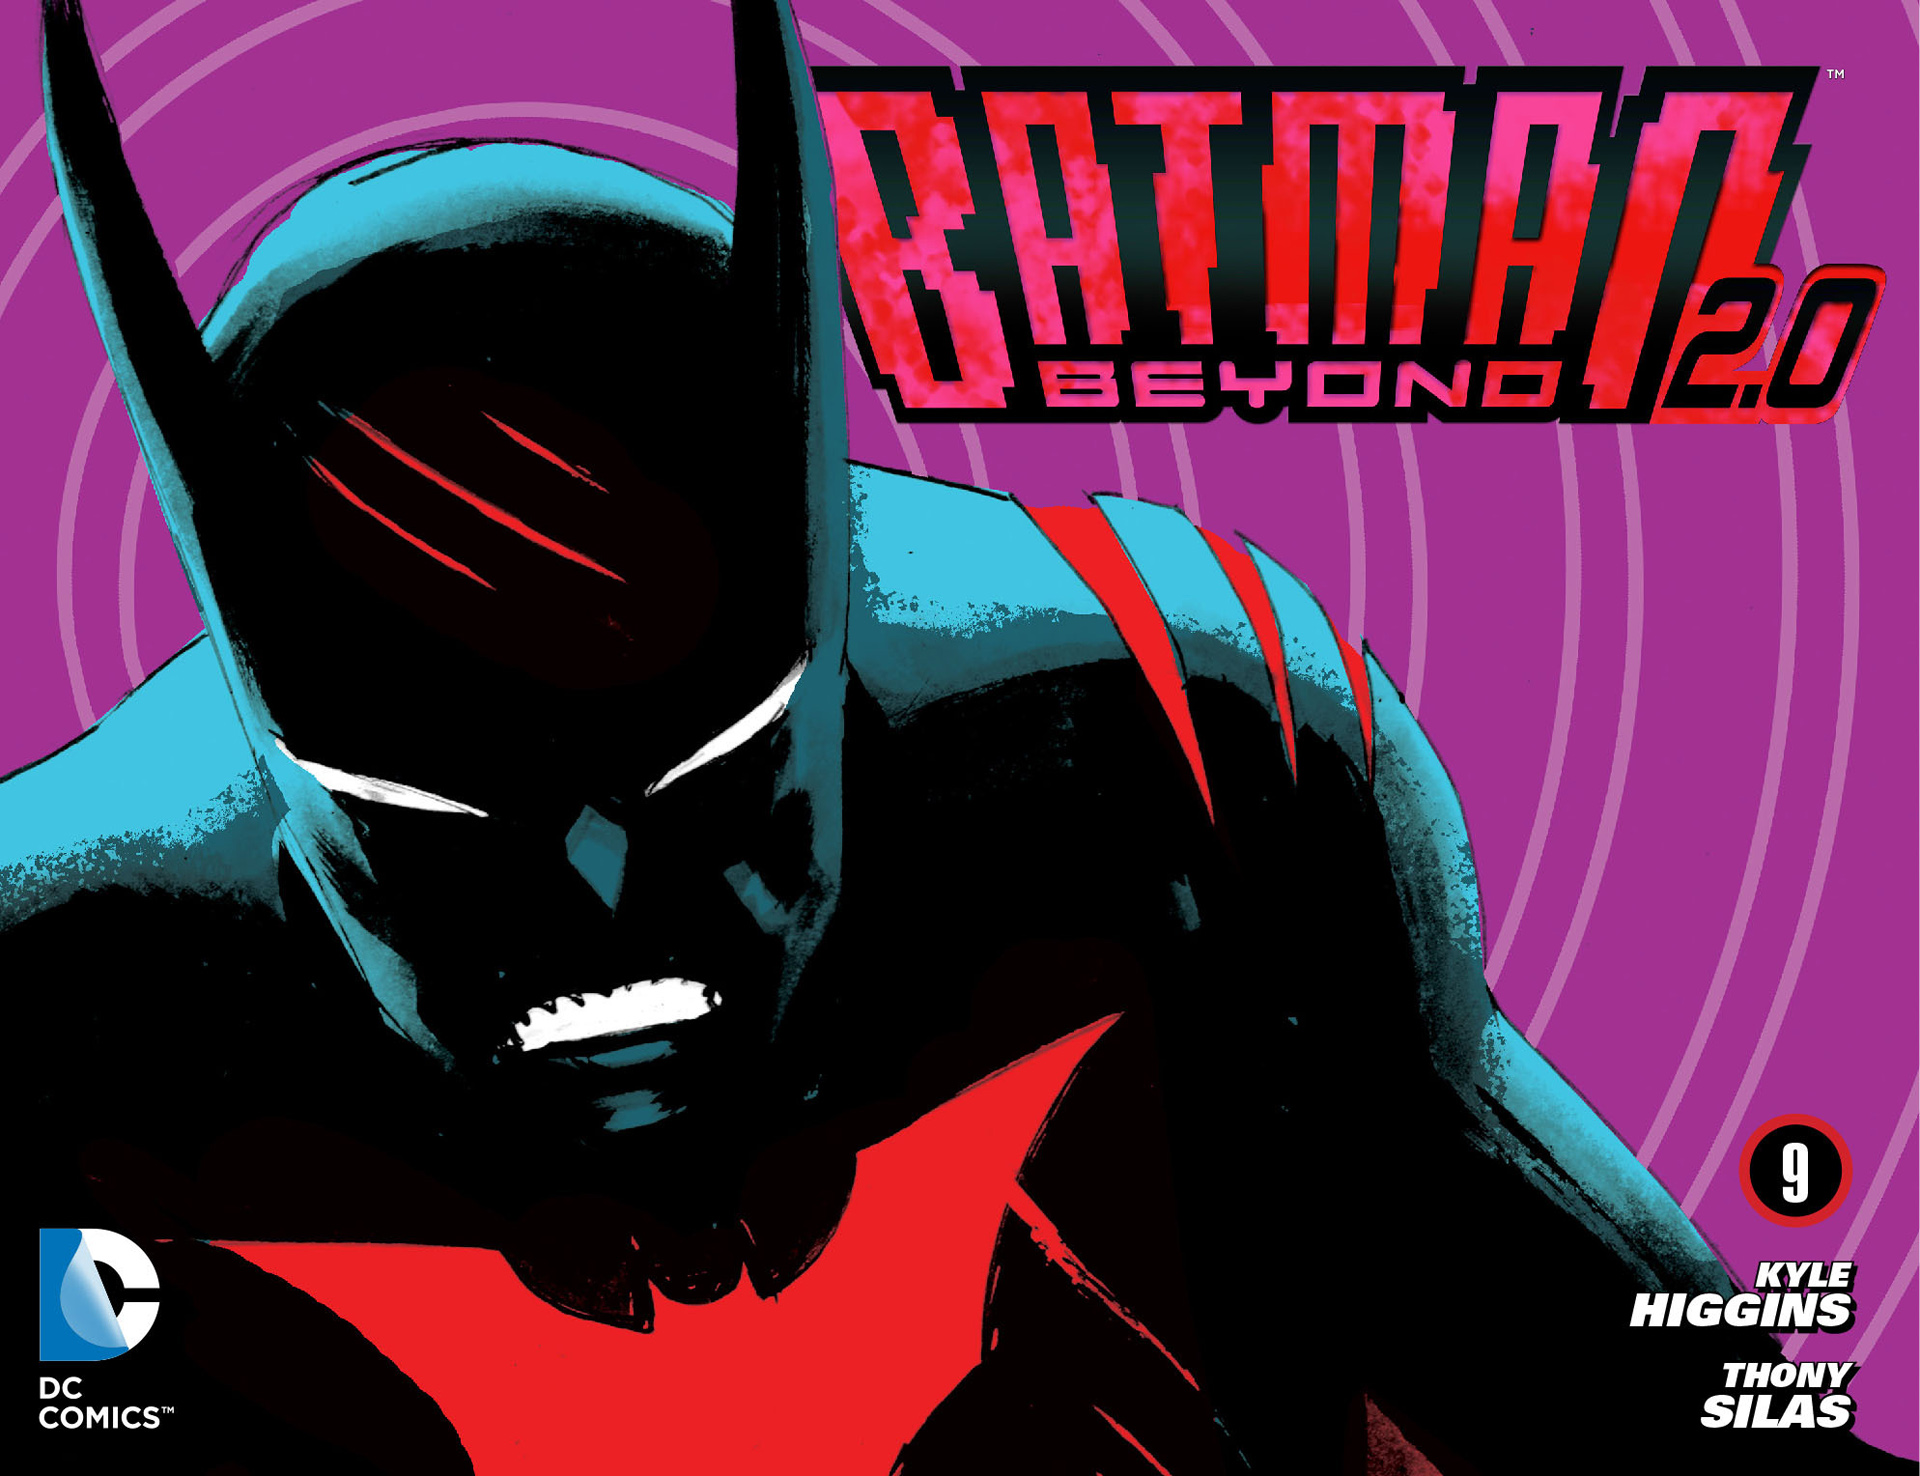 Batman Beyond 2.0 issue 9 - Page 1